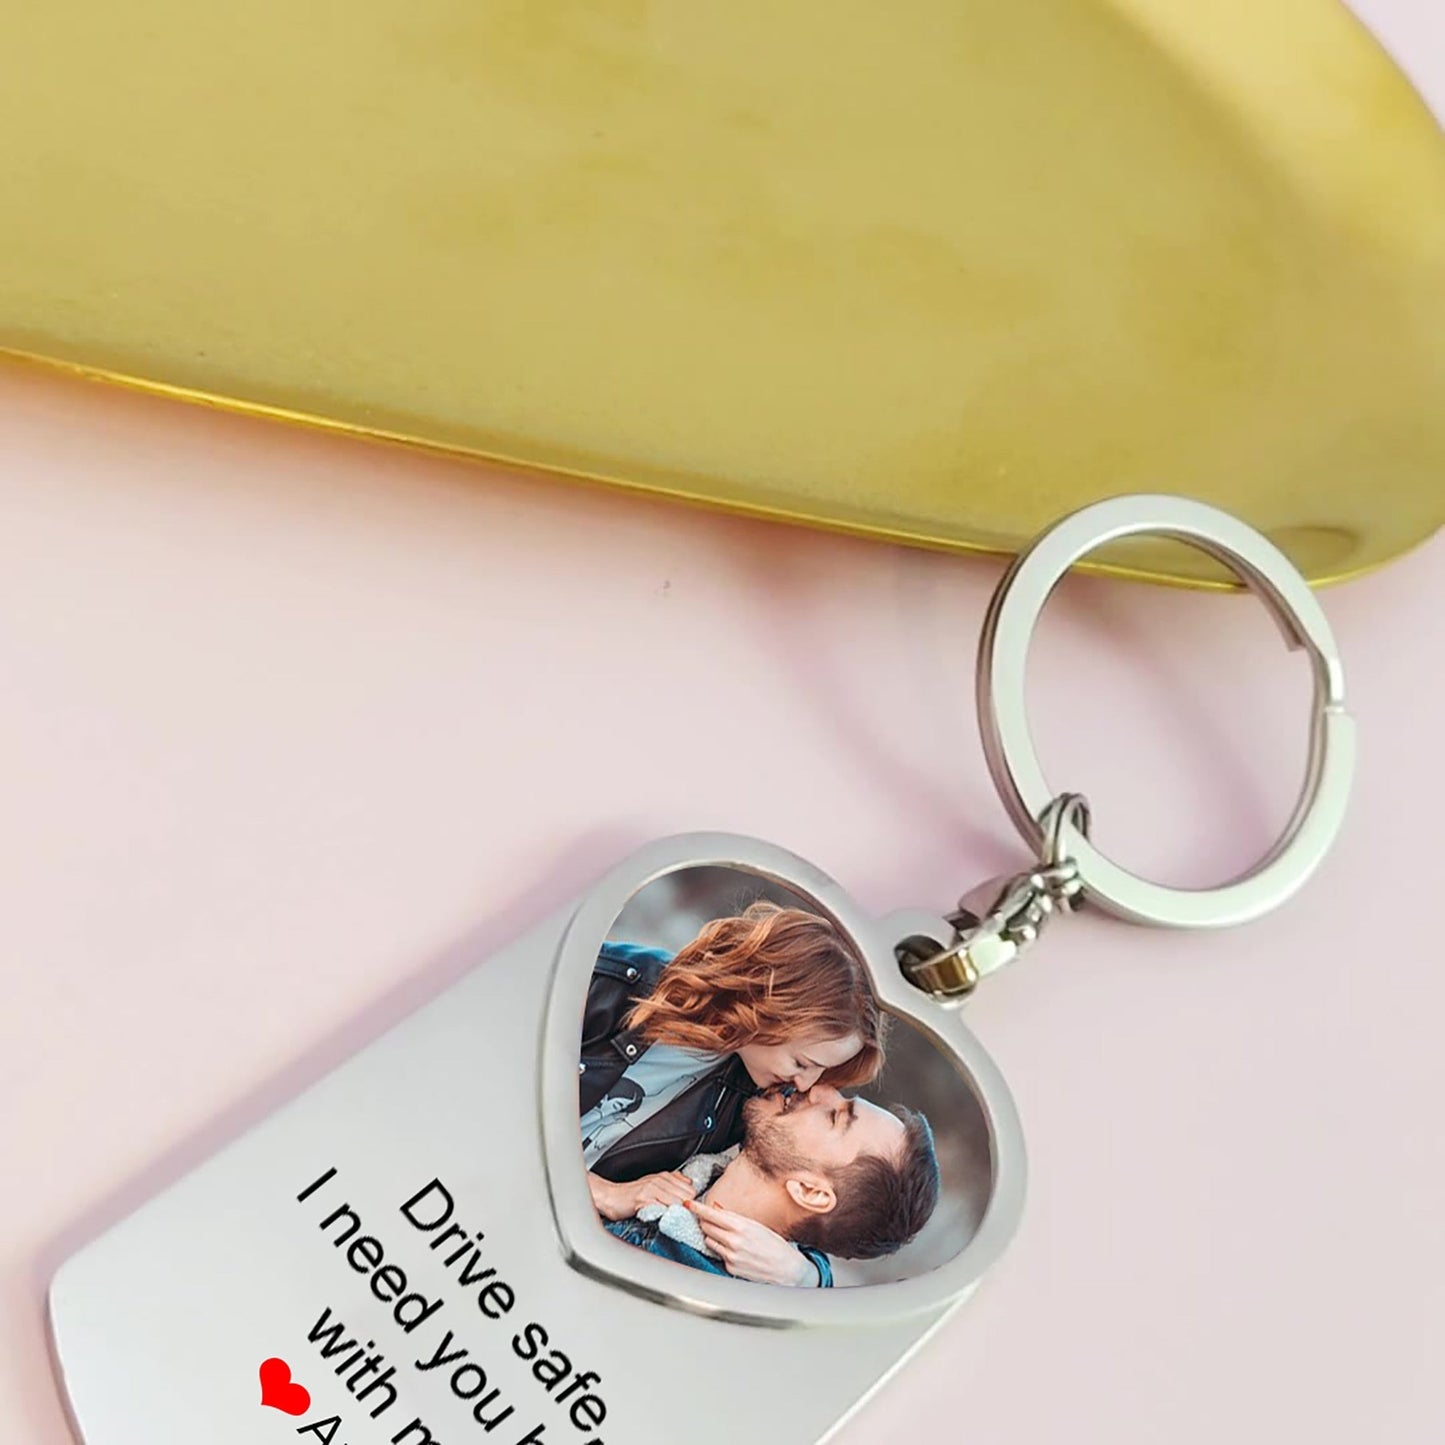 Drive Safe I Need You Here, Personalized Keychain